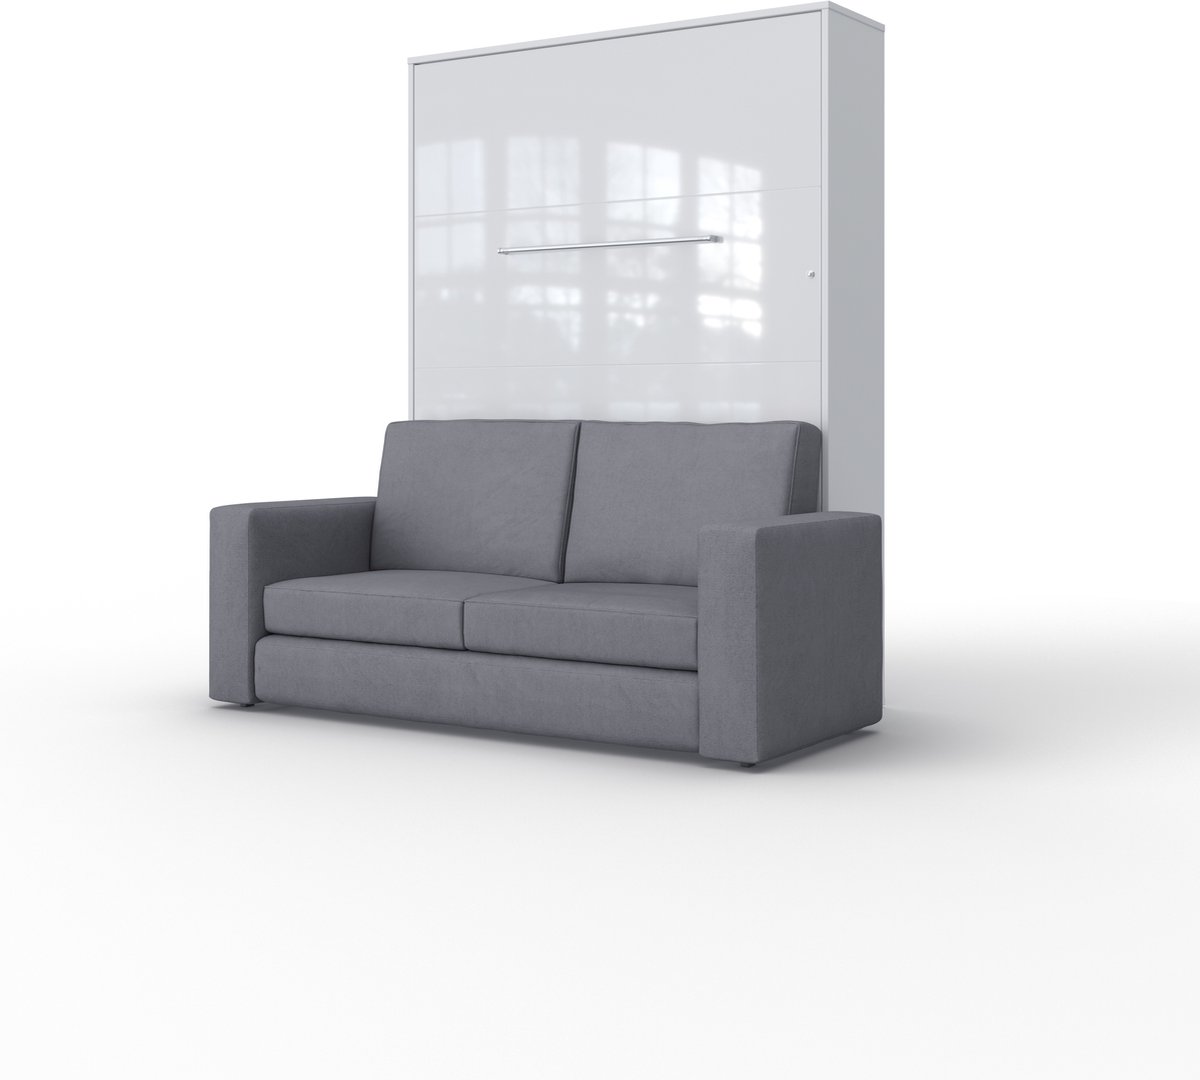 Maxima House - INVENTO SOFA Elegance - Verticaal Vouwbed Inclusief Bank - Logeerbed - Opklapbed - Bedkast - Inclusief LED - Hoogglans Wit + Antraciet Sofa - 200x140 cm